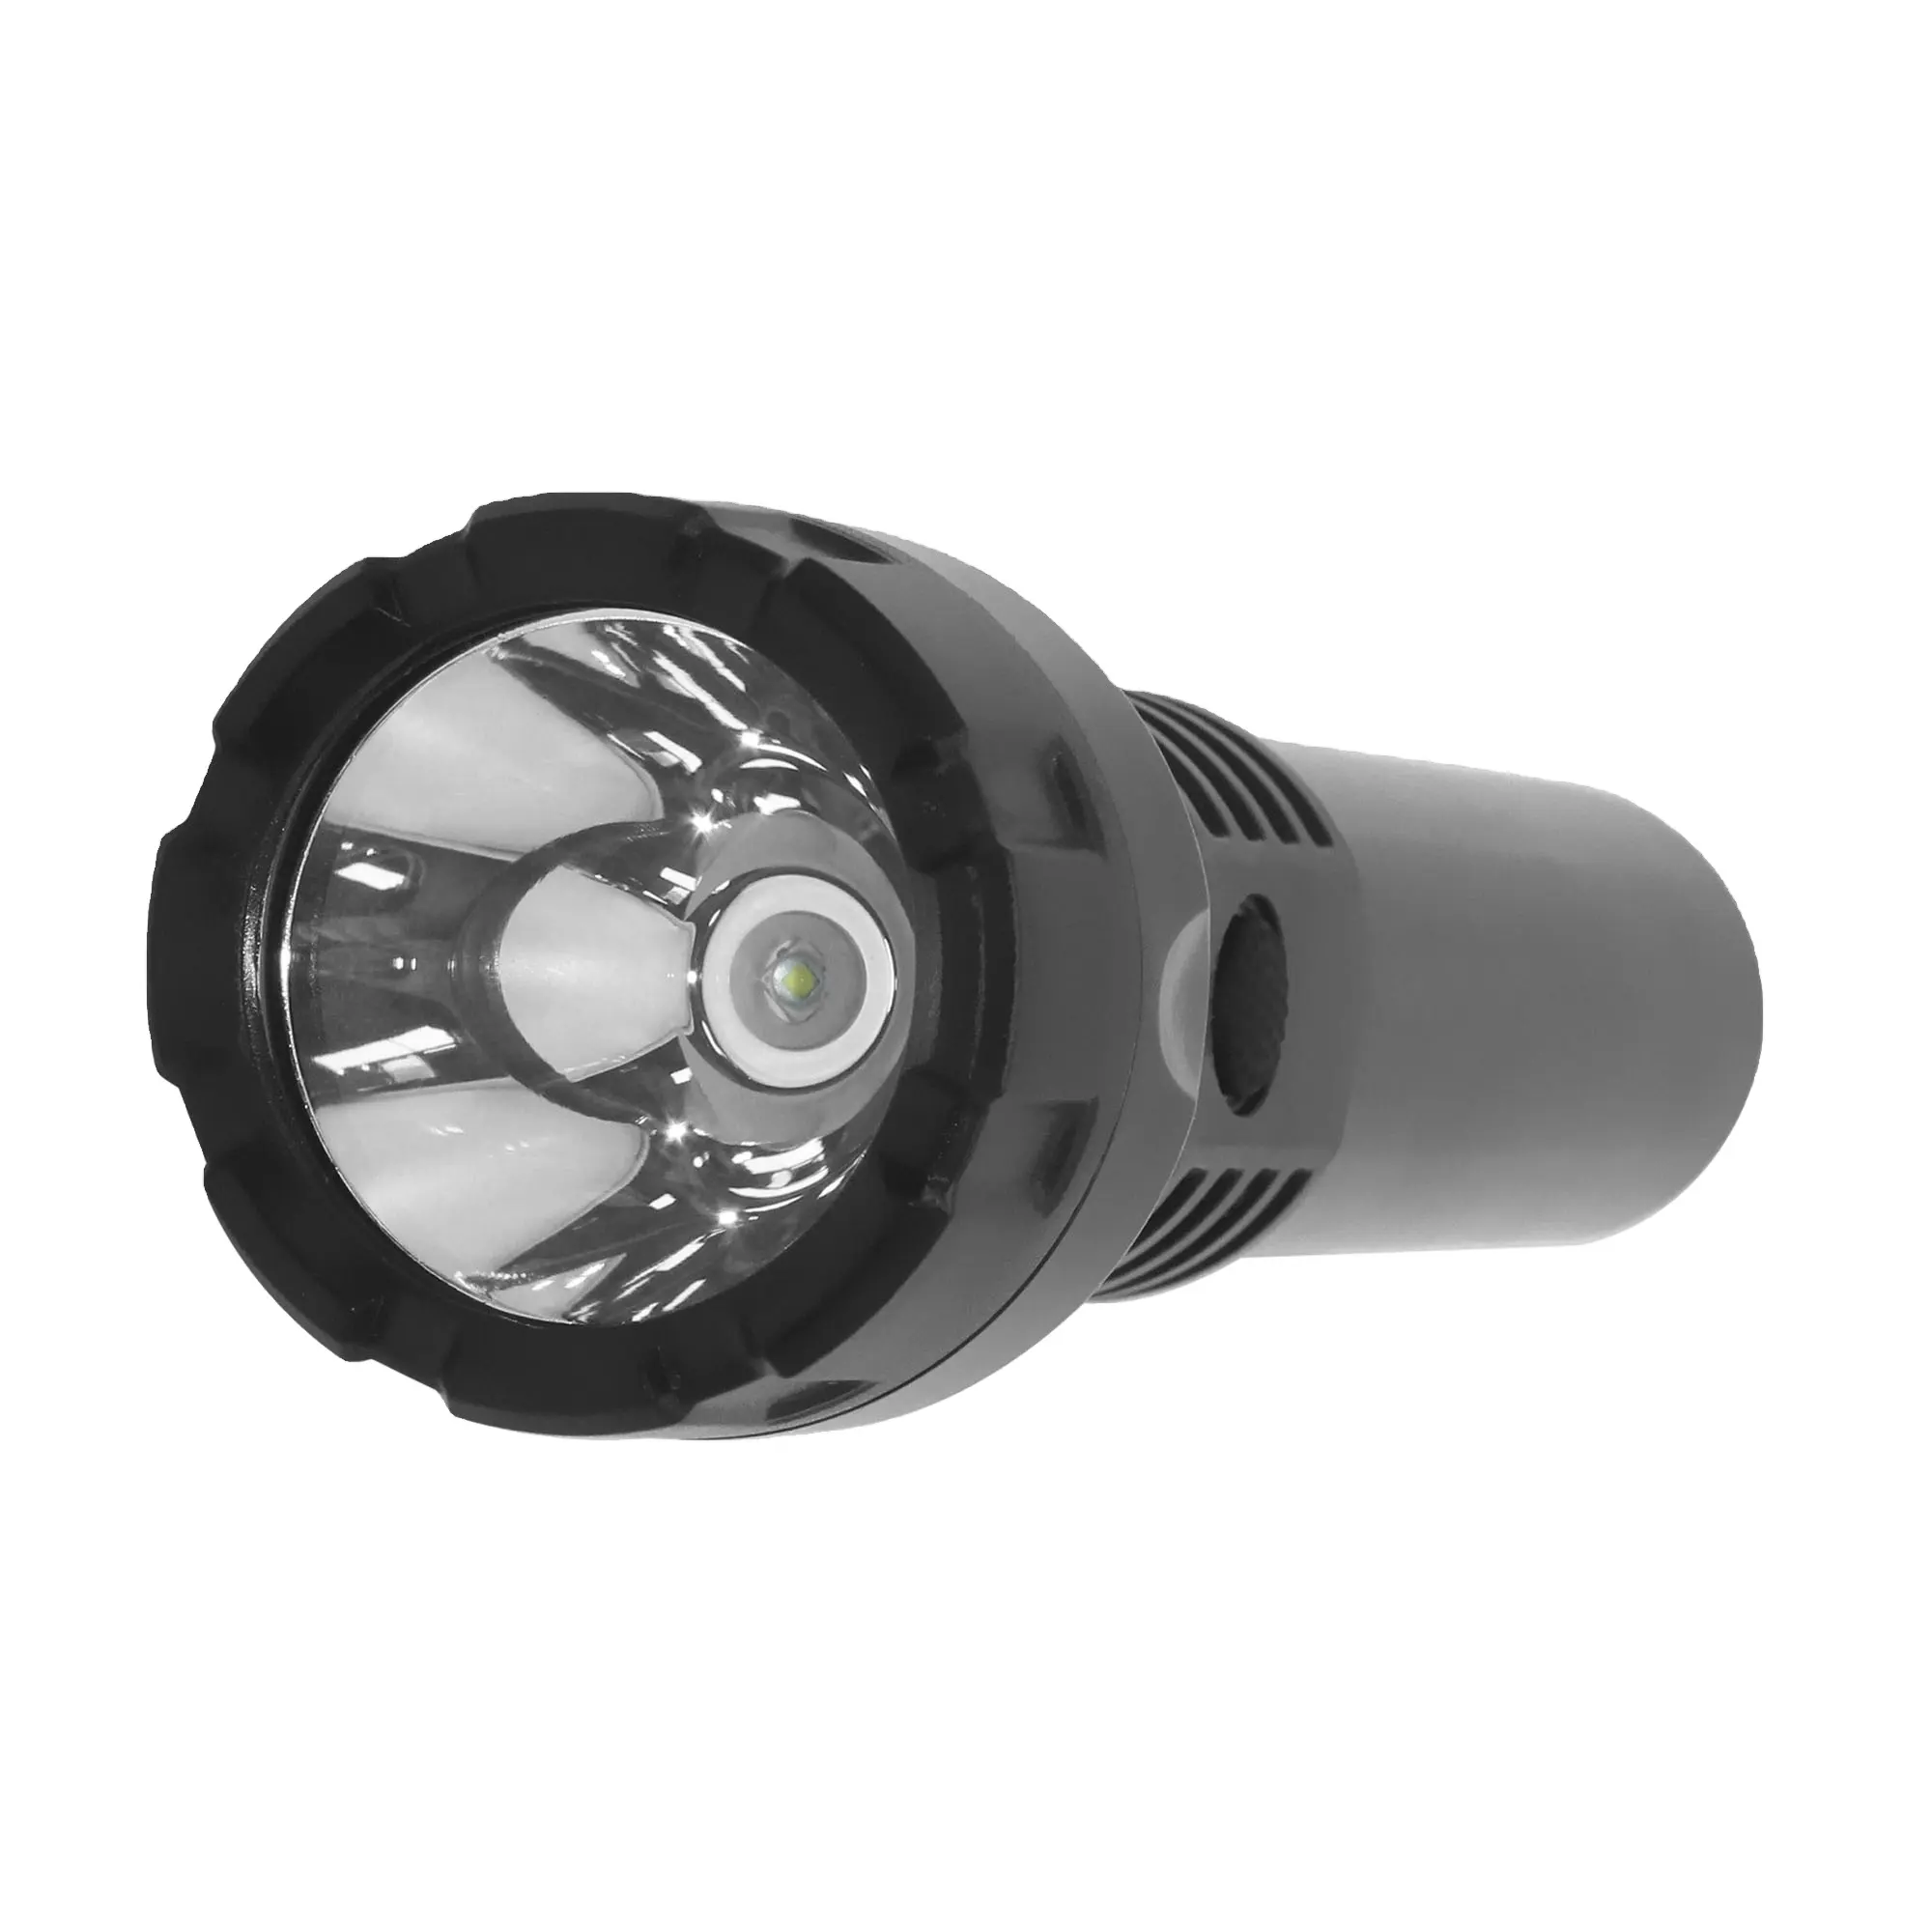 Best Bright Aluminum Led Rechargeable Handheld 5000mAh Battery or 5W LED Tactical Flashlight